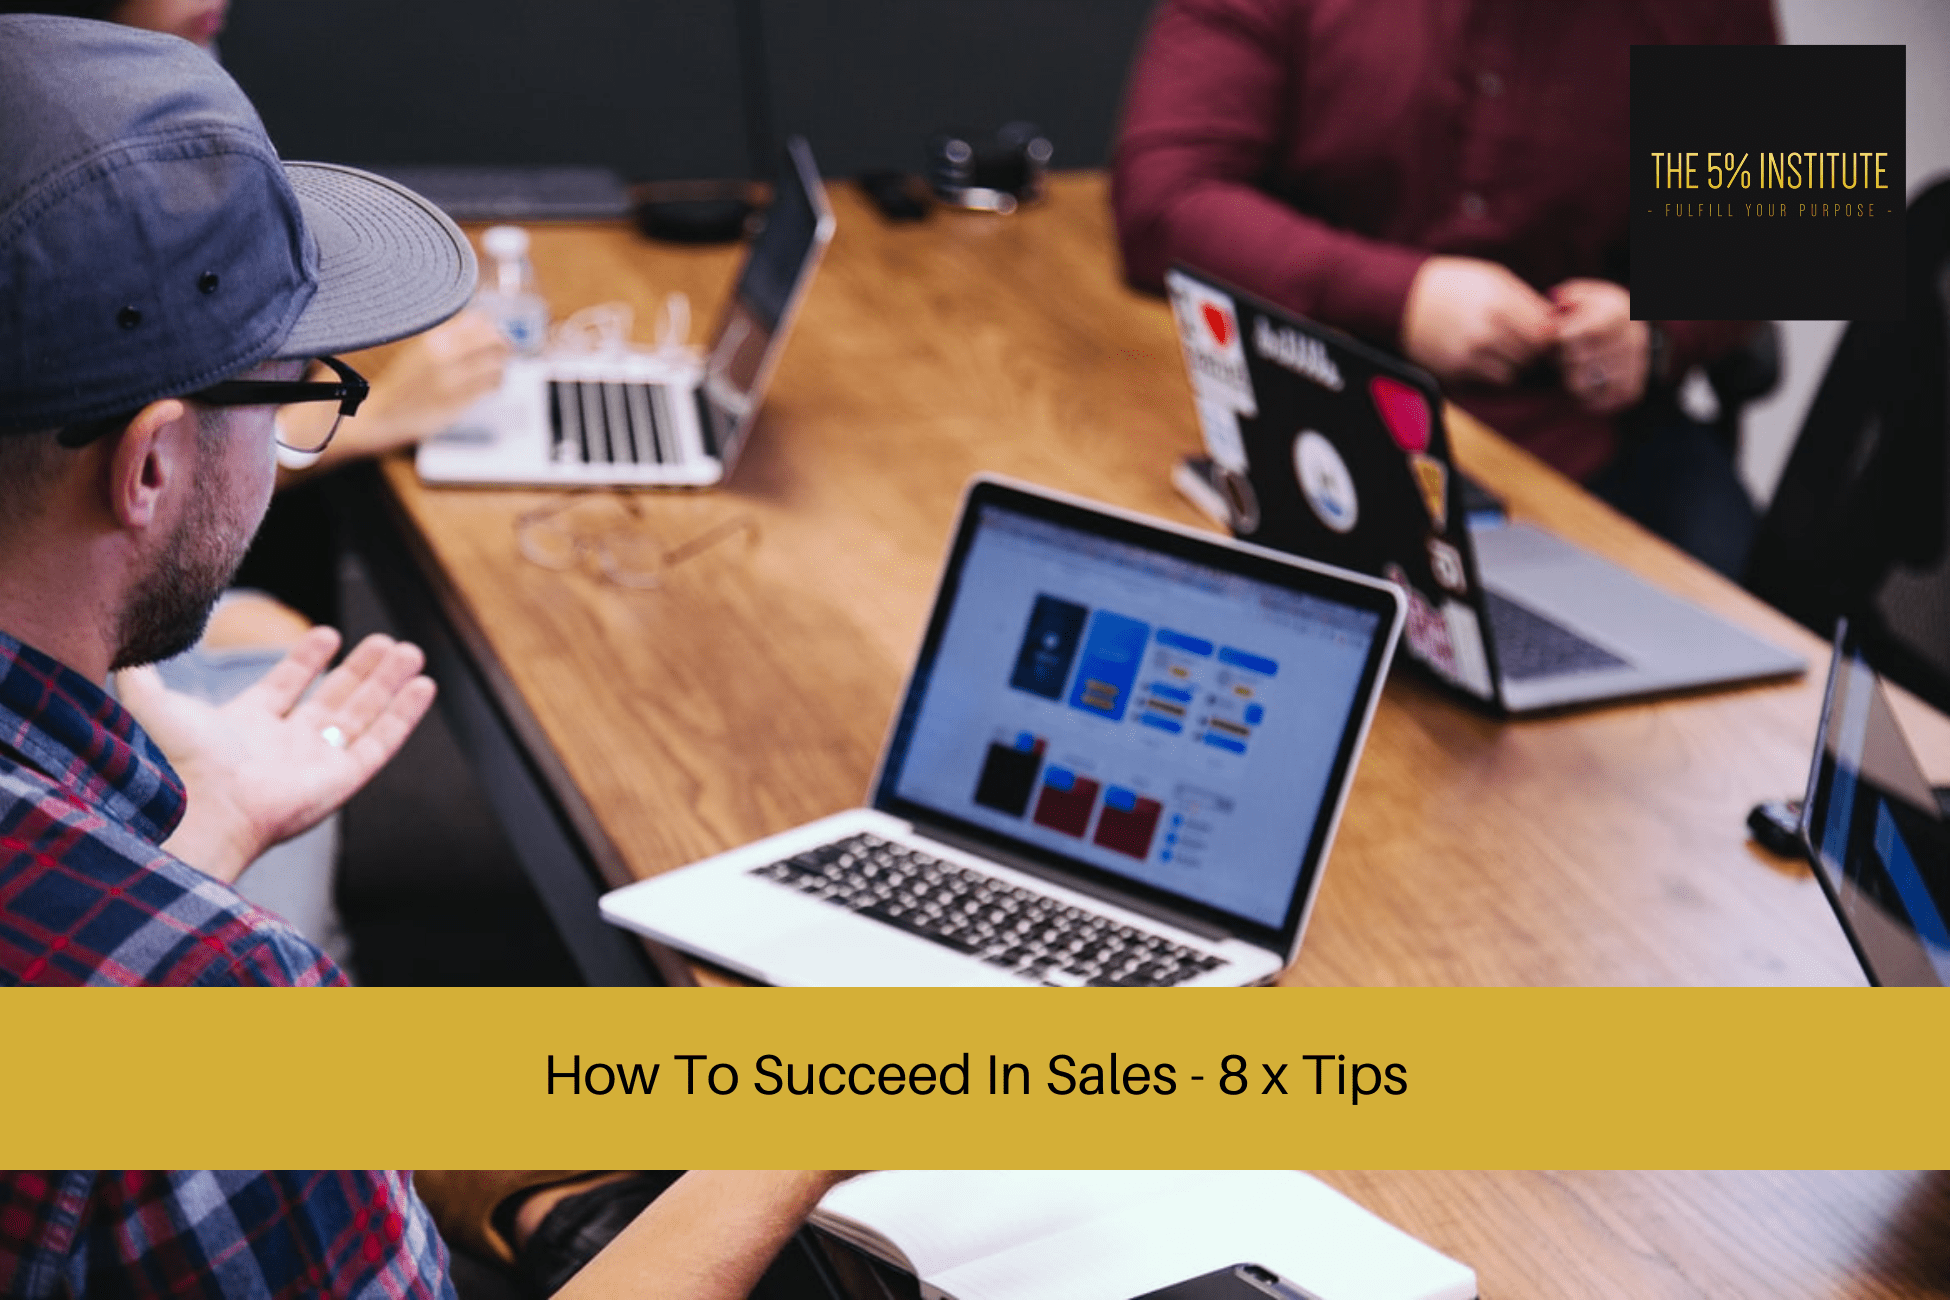 How To Succeed In Sales - 8 x Tips